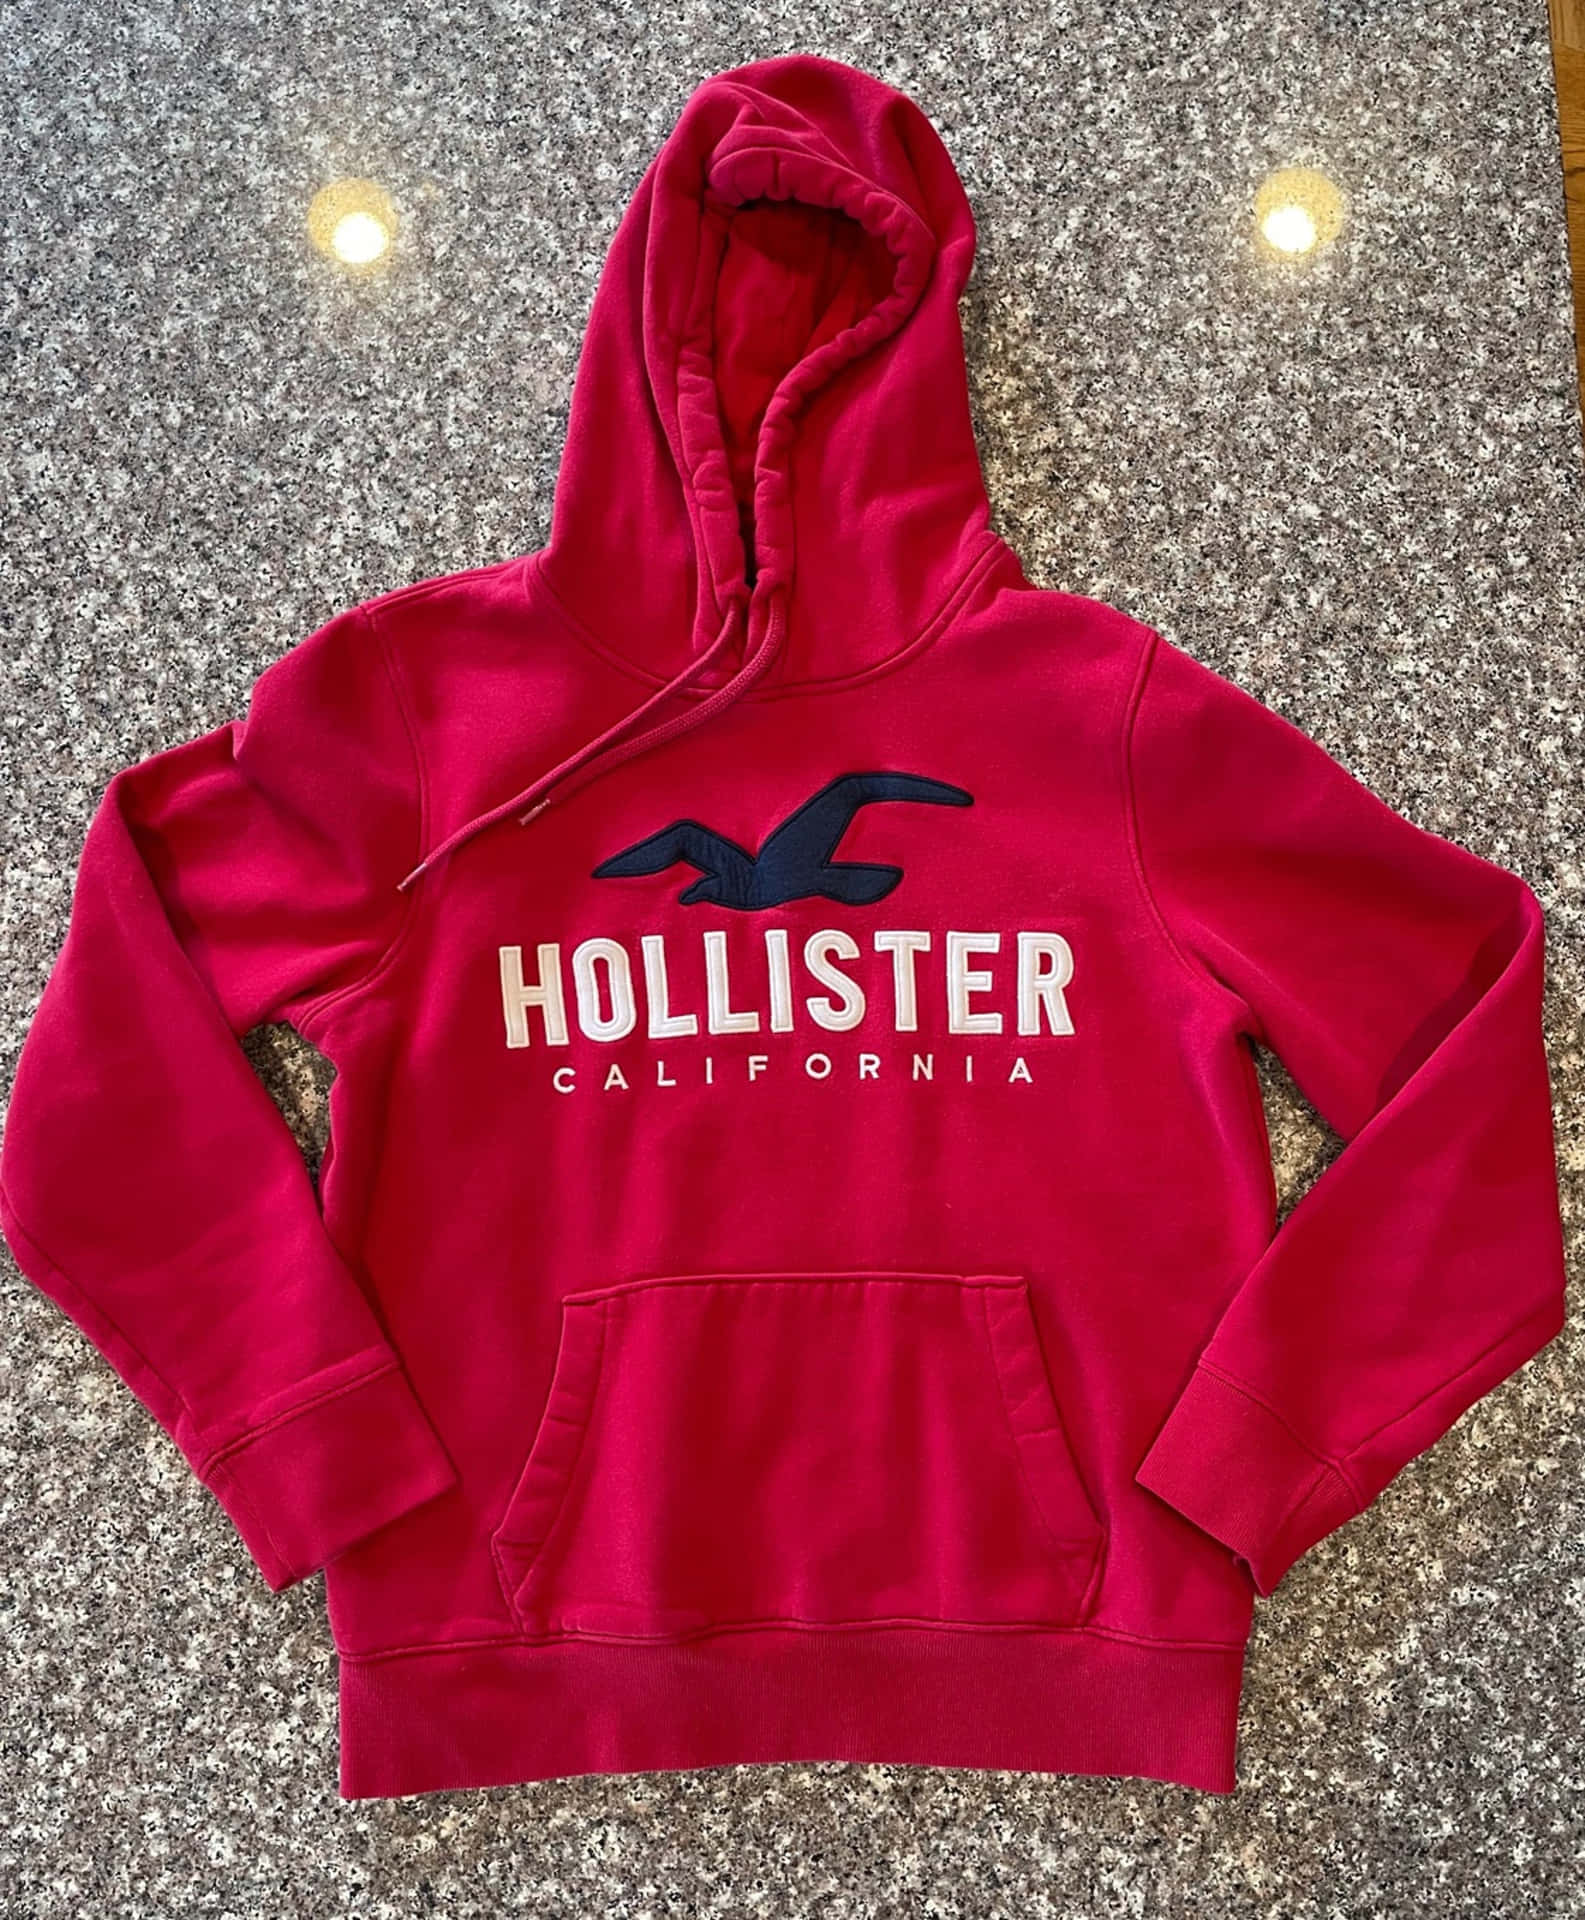 Visit the beach with Hollister!